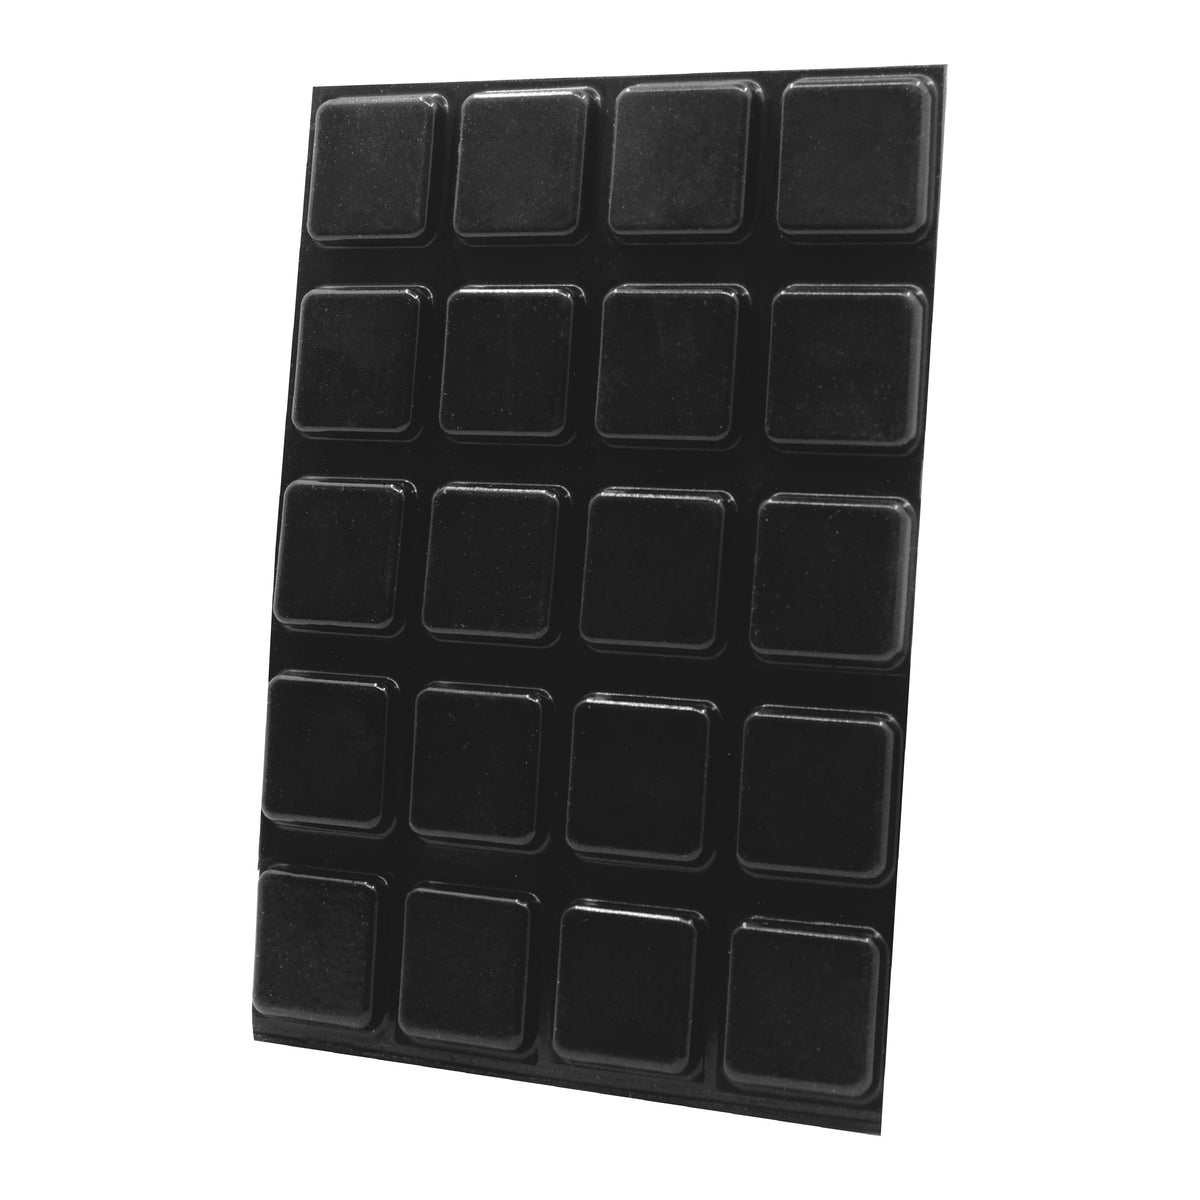 1 Inch Square.1875 Height Black Adhesive Rubber Feet